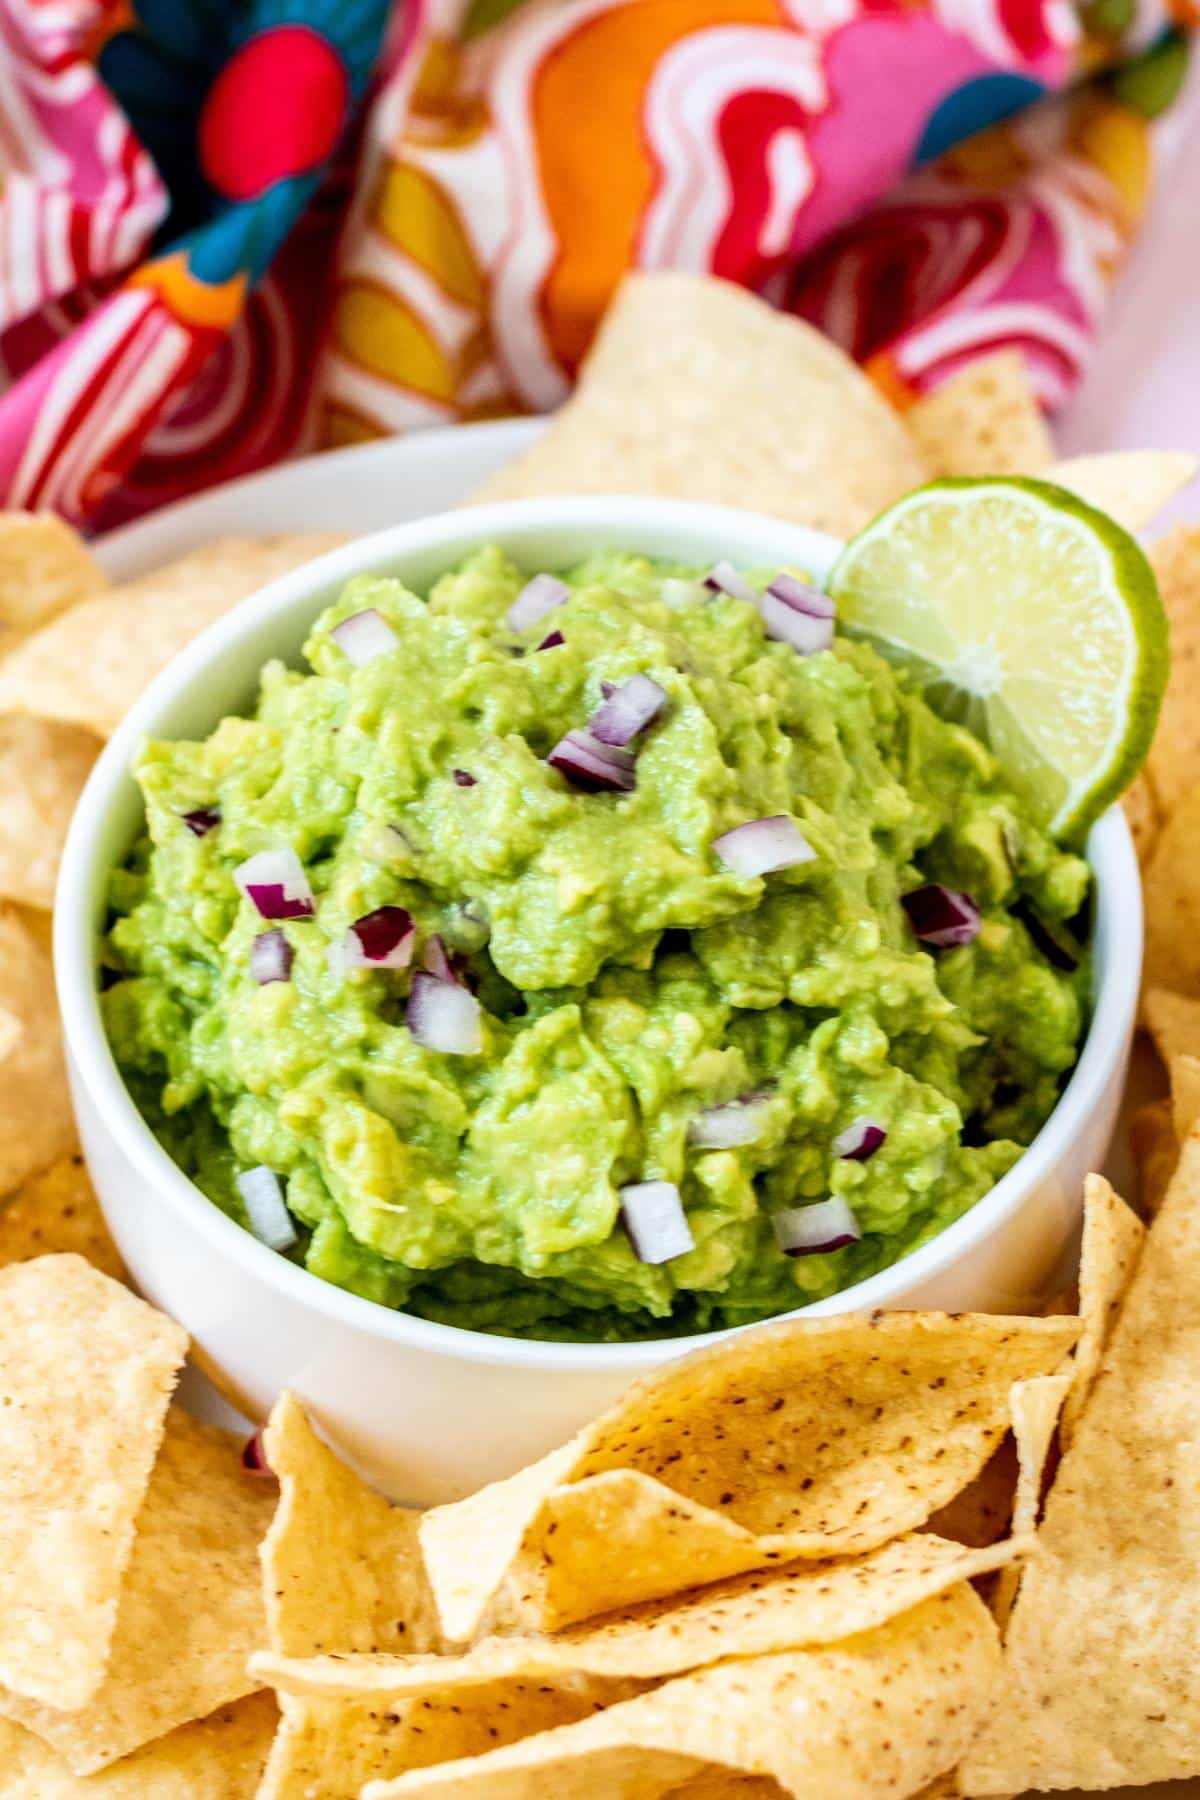 Bowl of guacamole with tortilla chips on the side.